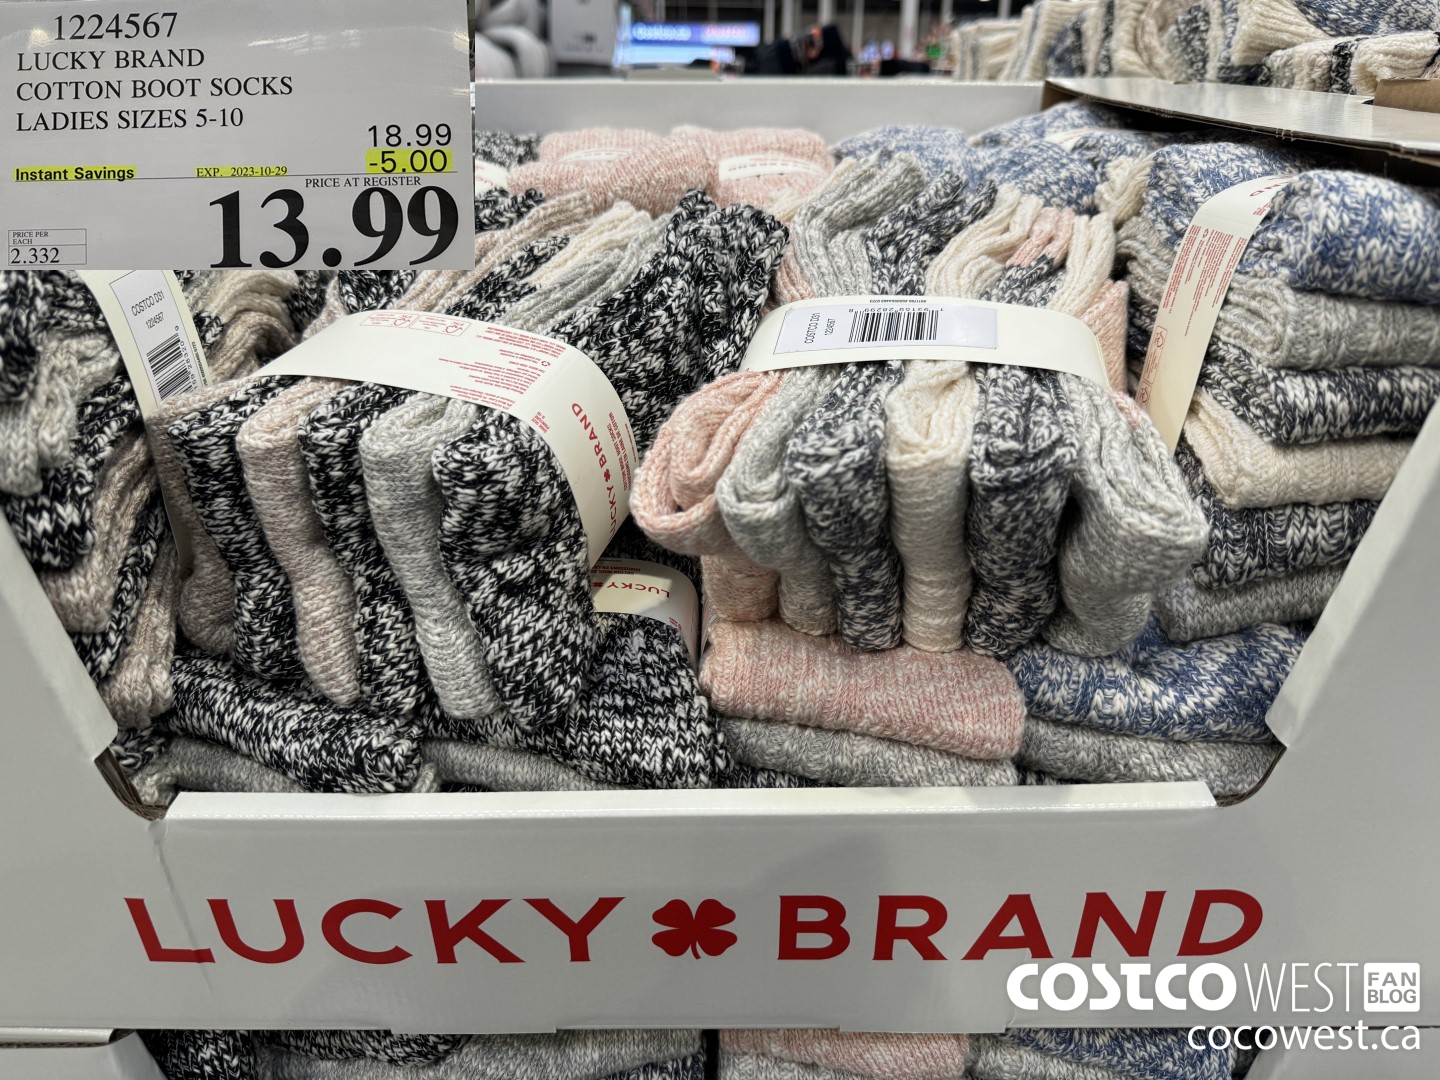 Lucky Brand Super Soft Boot Socks 6-Pack Only $6.99 at Costco